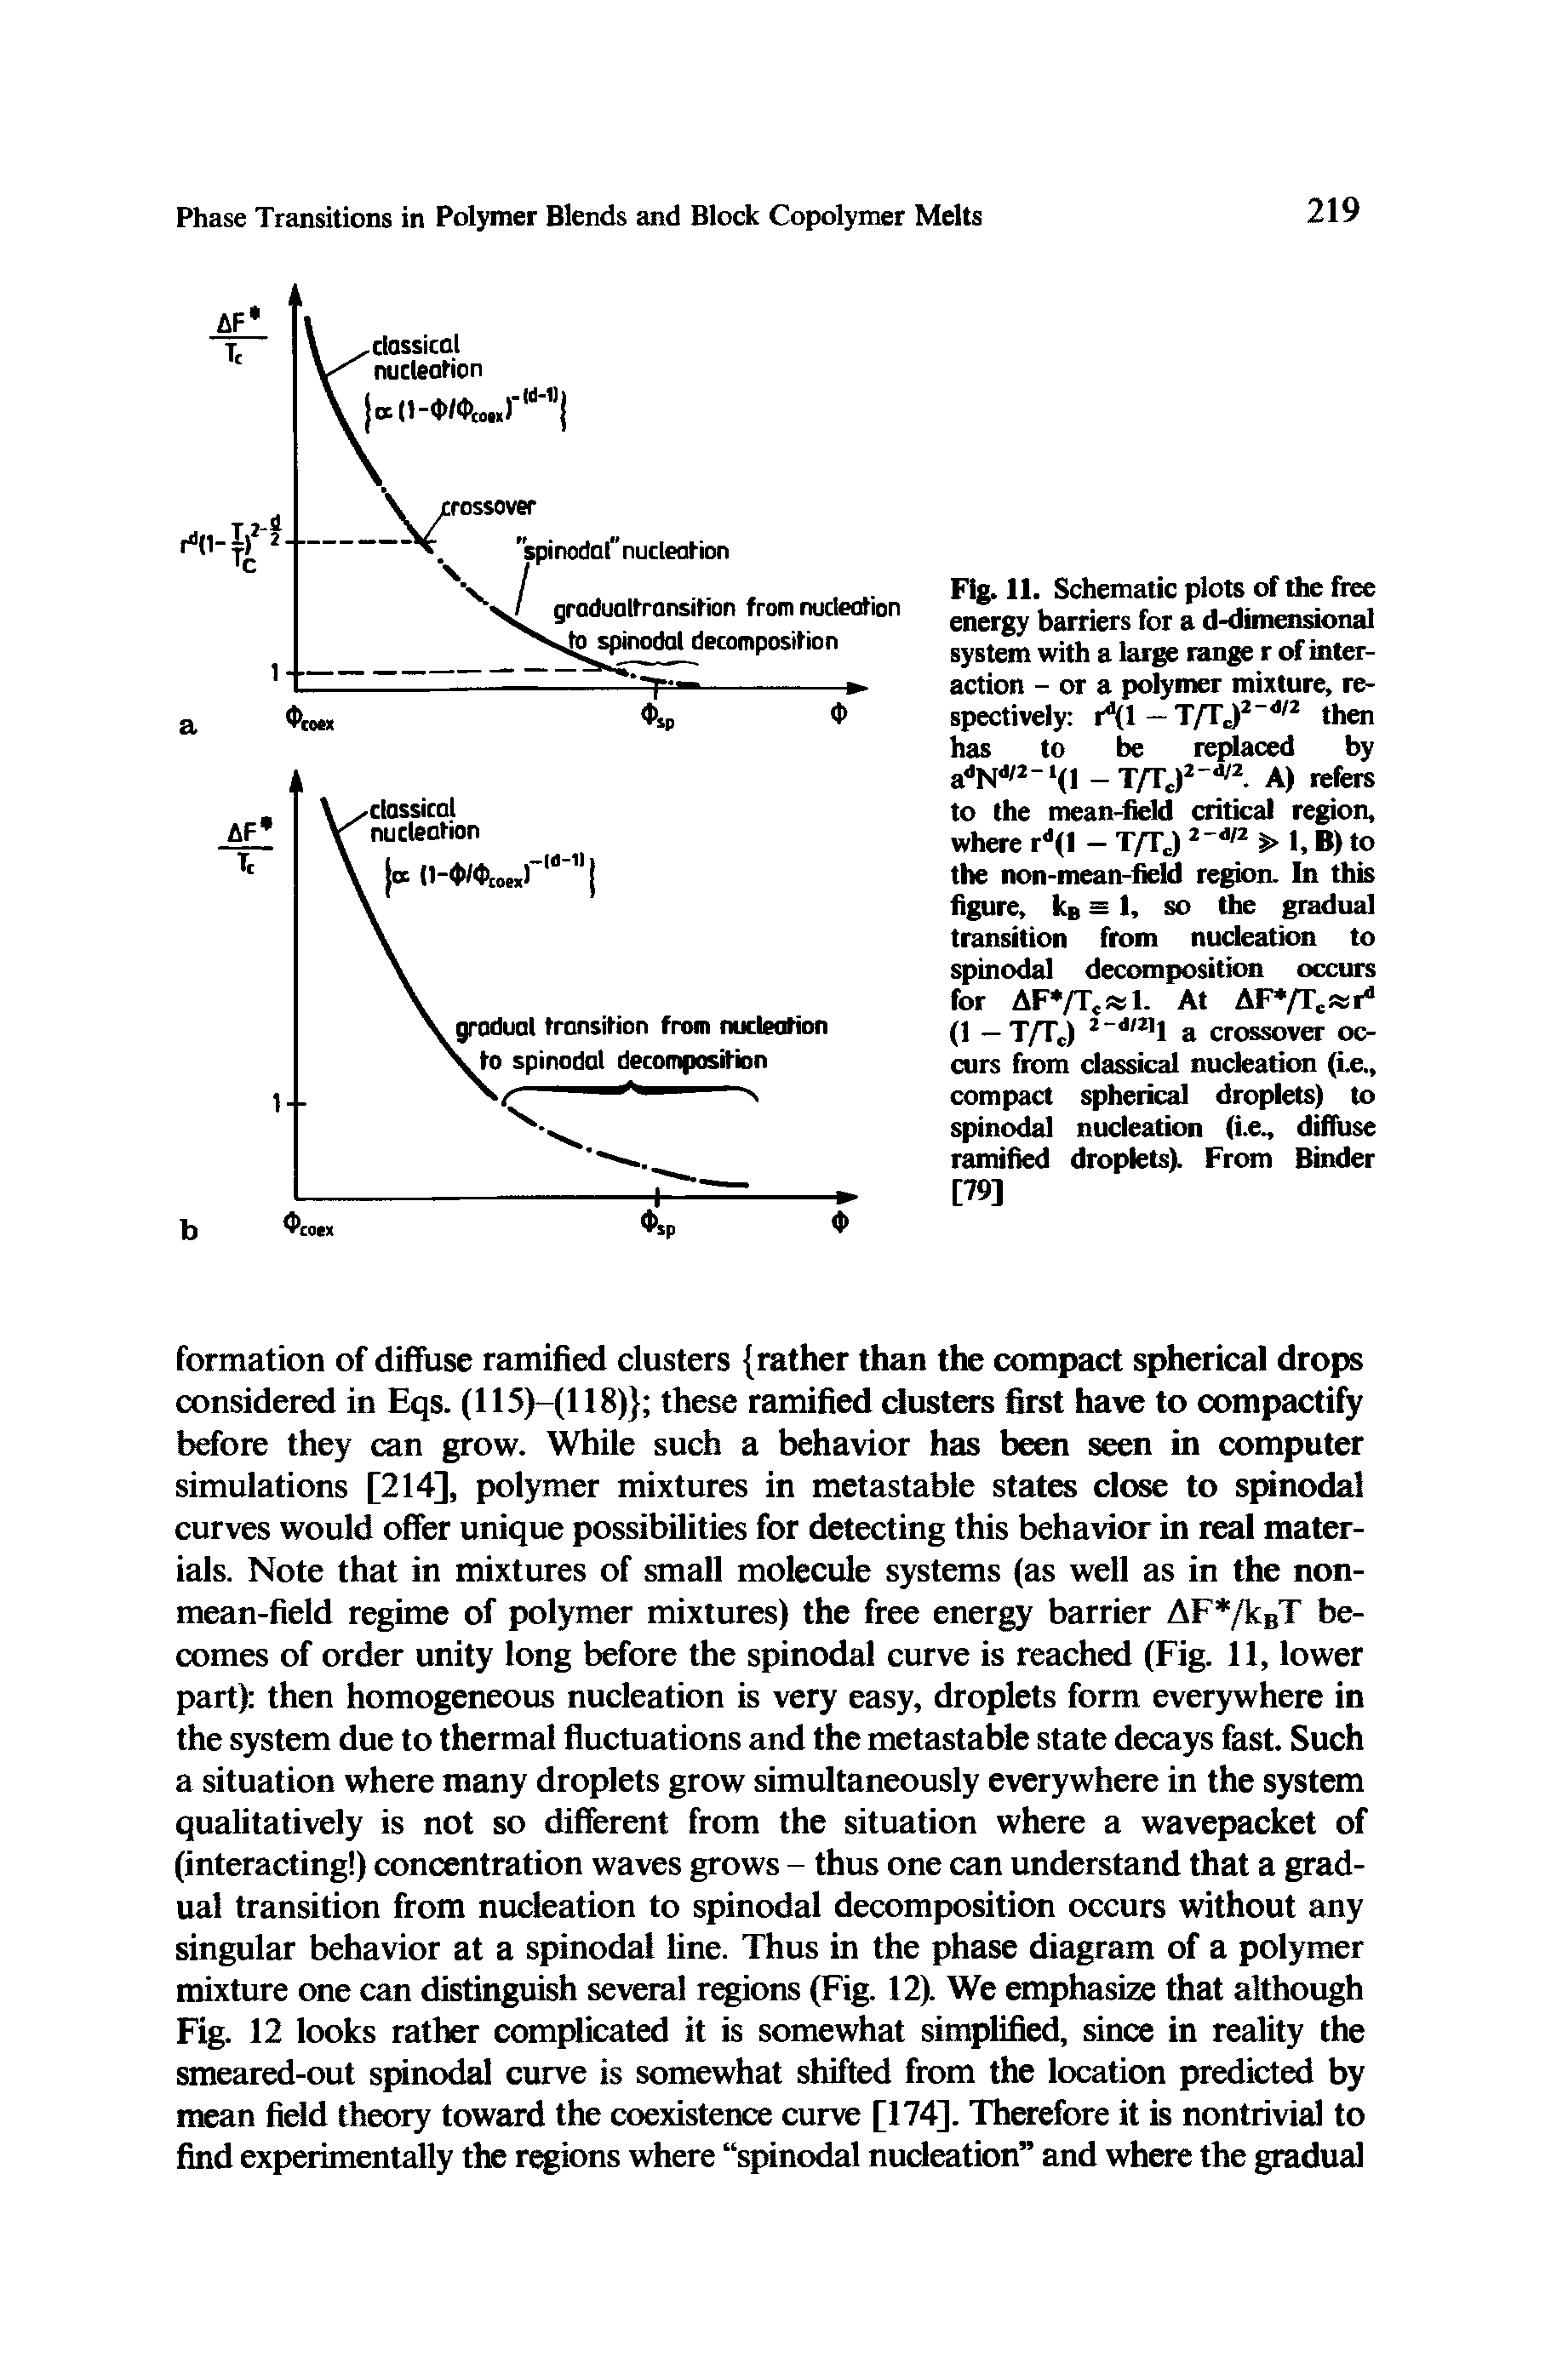 Fig. 11. Schematic plots of the free energy barriers for a d-dimensional system with a large range r of interaction - or a polymer mixture, respectively 1 (1 — T/Tc)2 d/2 then has to be replaced by adNd/2-i(i T/Tc)2-d/2. A) refers to the mean-field critical region, where rd(l - T/Tc) 2 d/2 > 1, B) to the non-mean-field region. In this figure, kg = l, so the gradual transition from nucleation to spinodal decomposition occurs for AF /TC 1. At AF /Tc rd (1 — T/Tc) 2-d,2,l a crossover occurs from classical nucleation (Le., compact spherical droplets) to spinodal nucleation (i.e., diffuse ramified droplets). From Binder [79]...